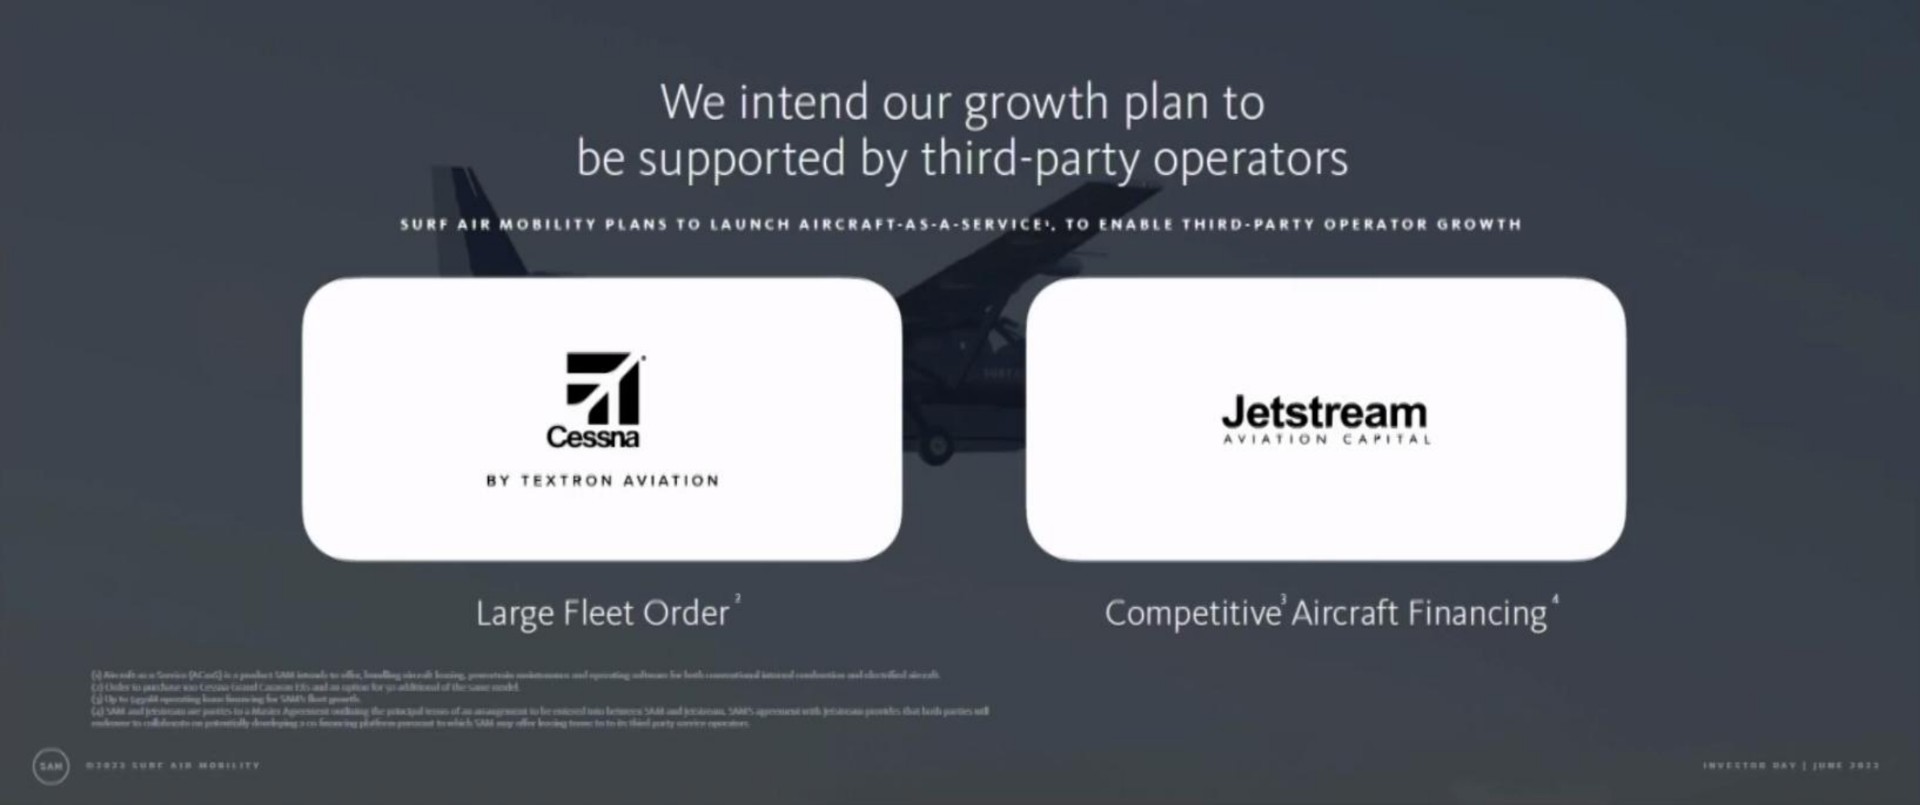 we intend our growth plan to be supported by third party operators surf air mobility plans to launch aircraft as a service to enable third party operator growth by aviation large fleet order competitive aircraft financing | Surf Air